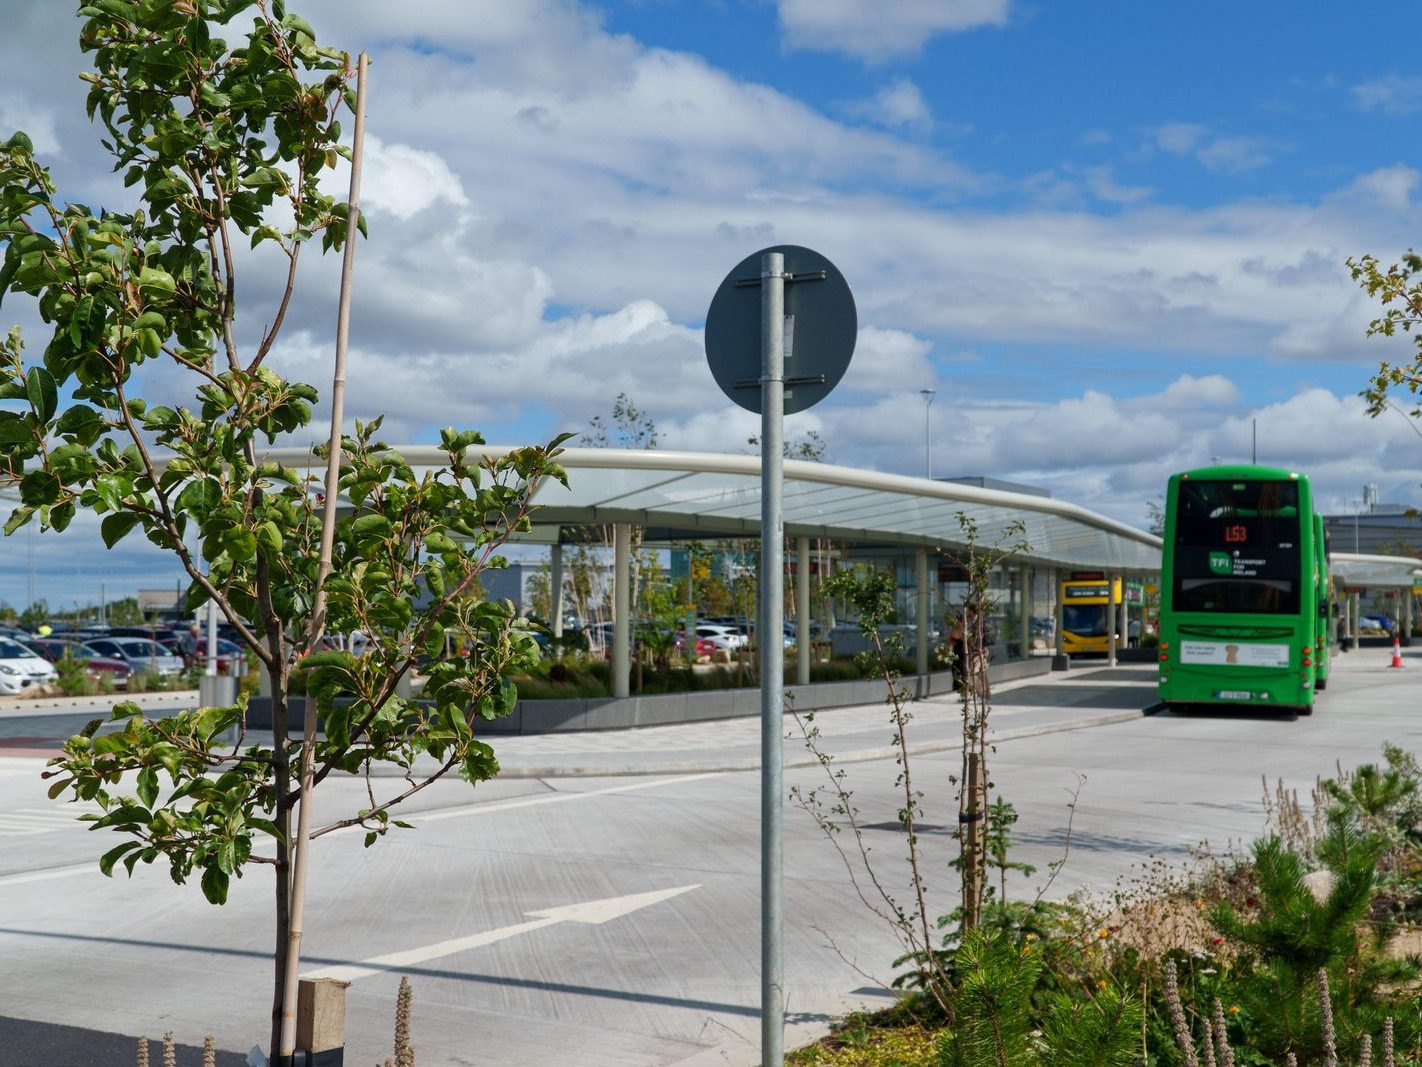 THE NEW BUS PLAZA THAT I DID NOT KNOW ABOUT [AT LIFFEY VALLEY SHOPPING CENTRE] 014